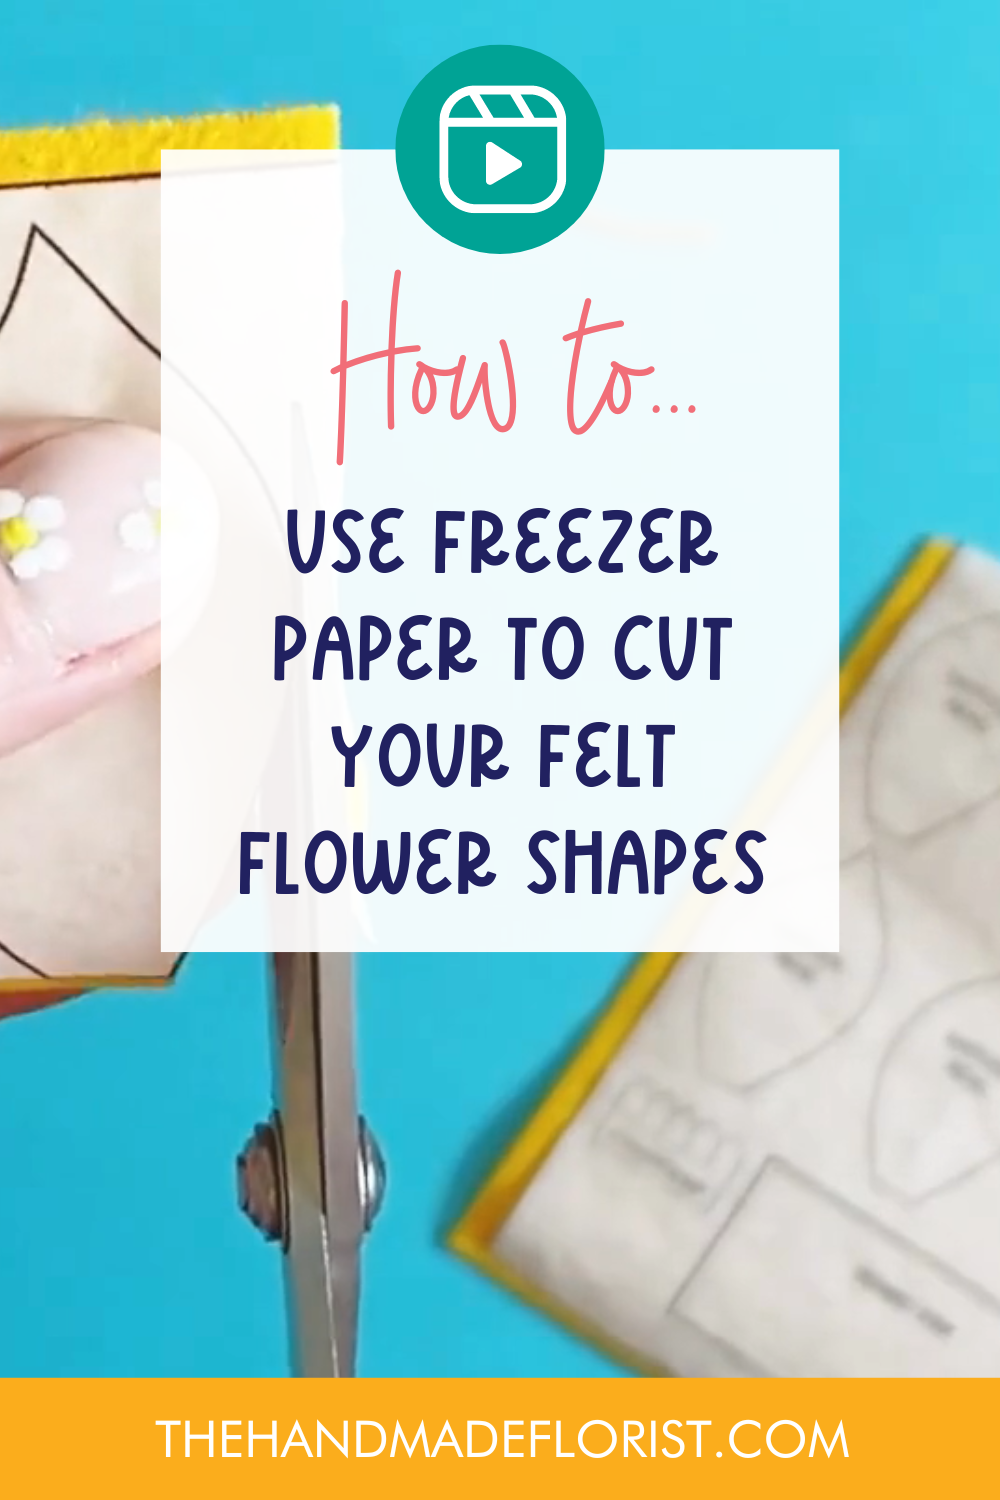 How to use freezer paper to cut your felt flower shapes